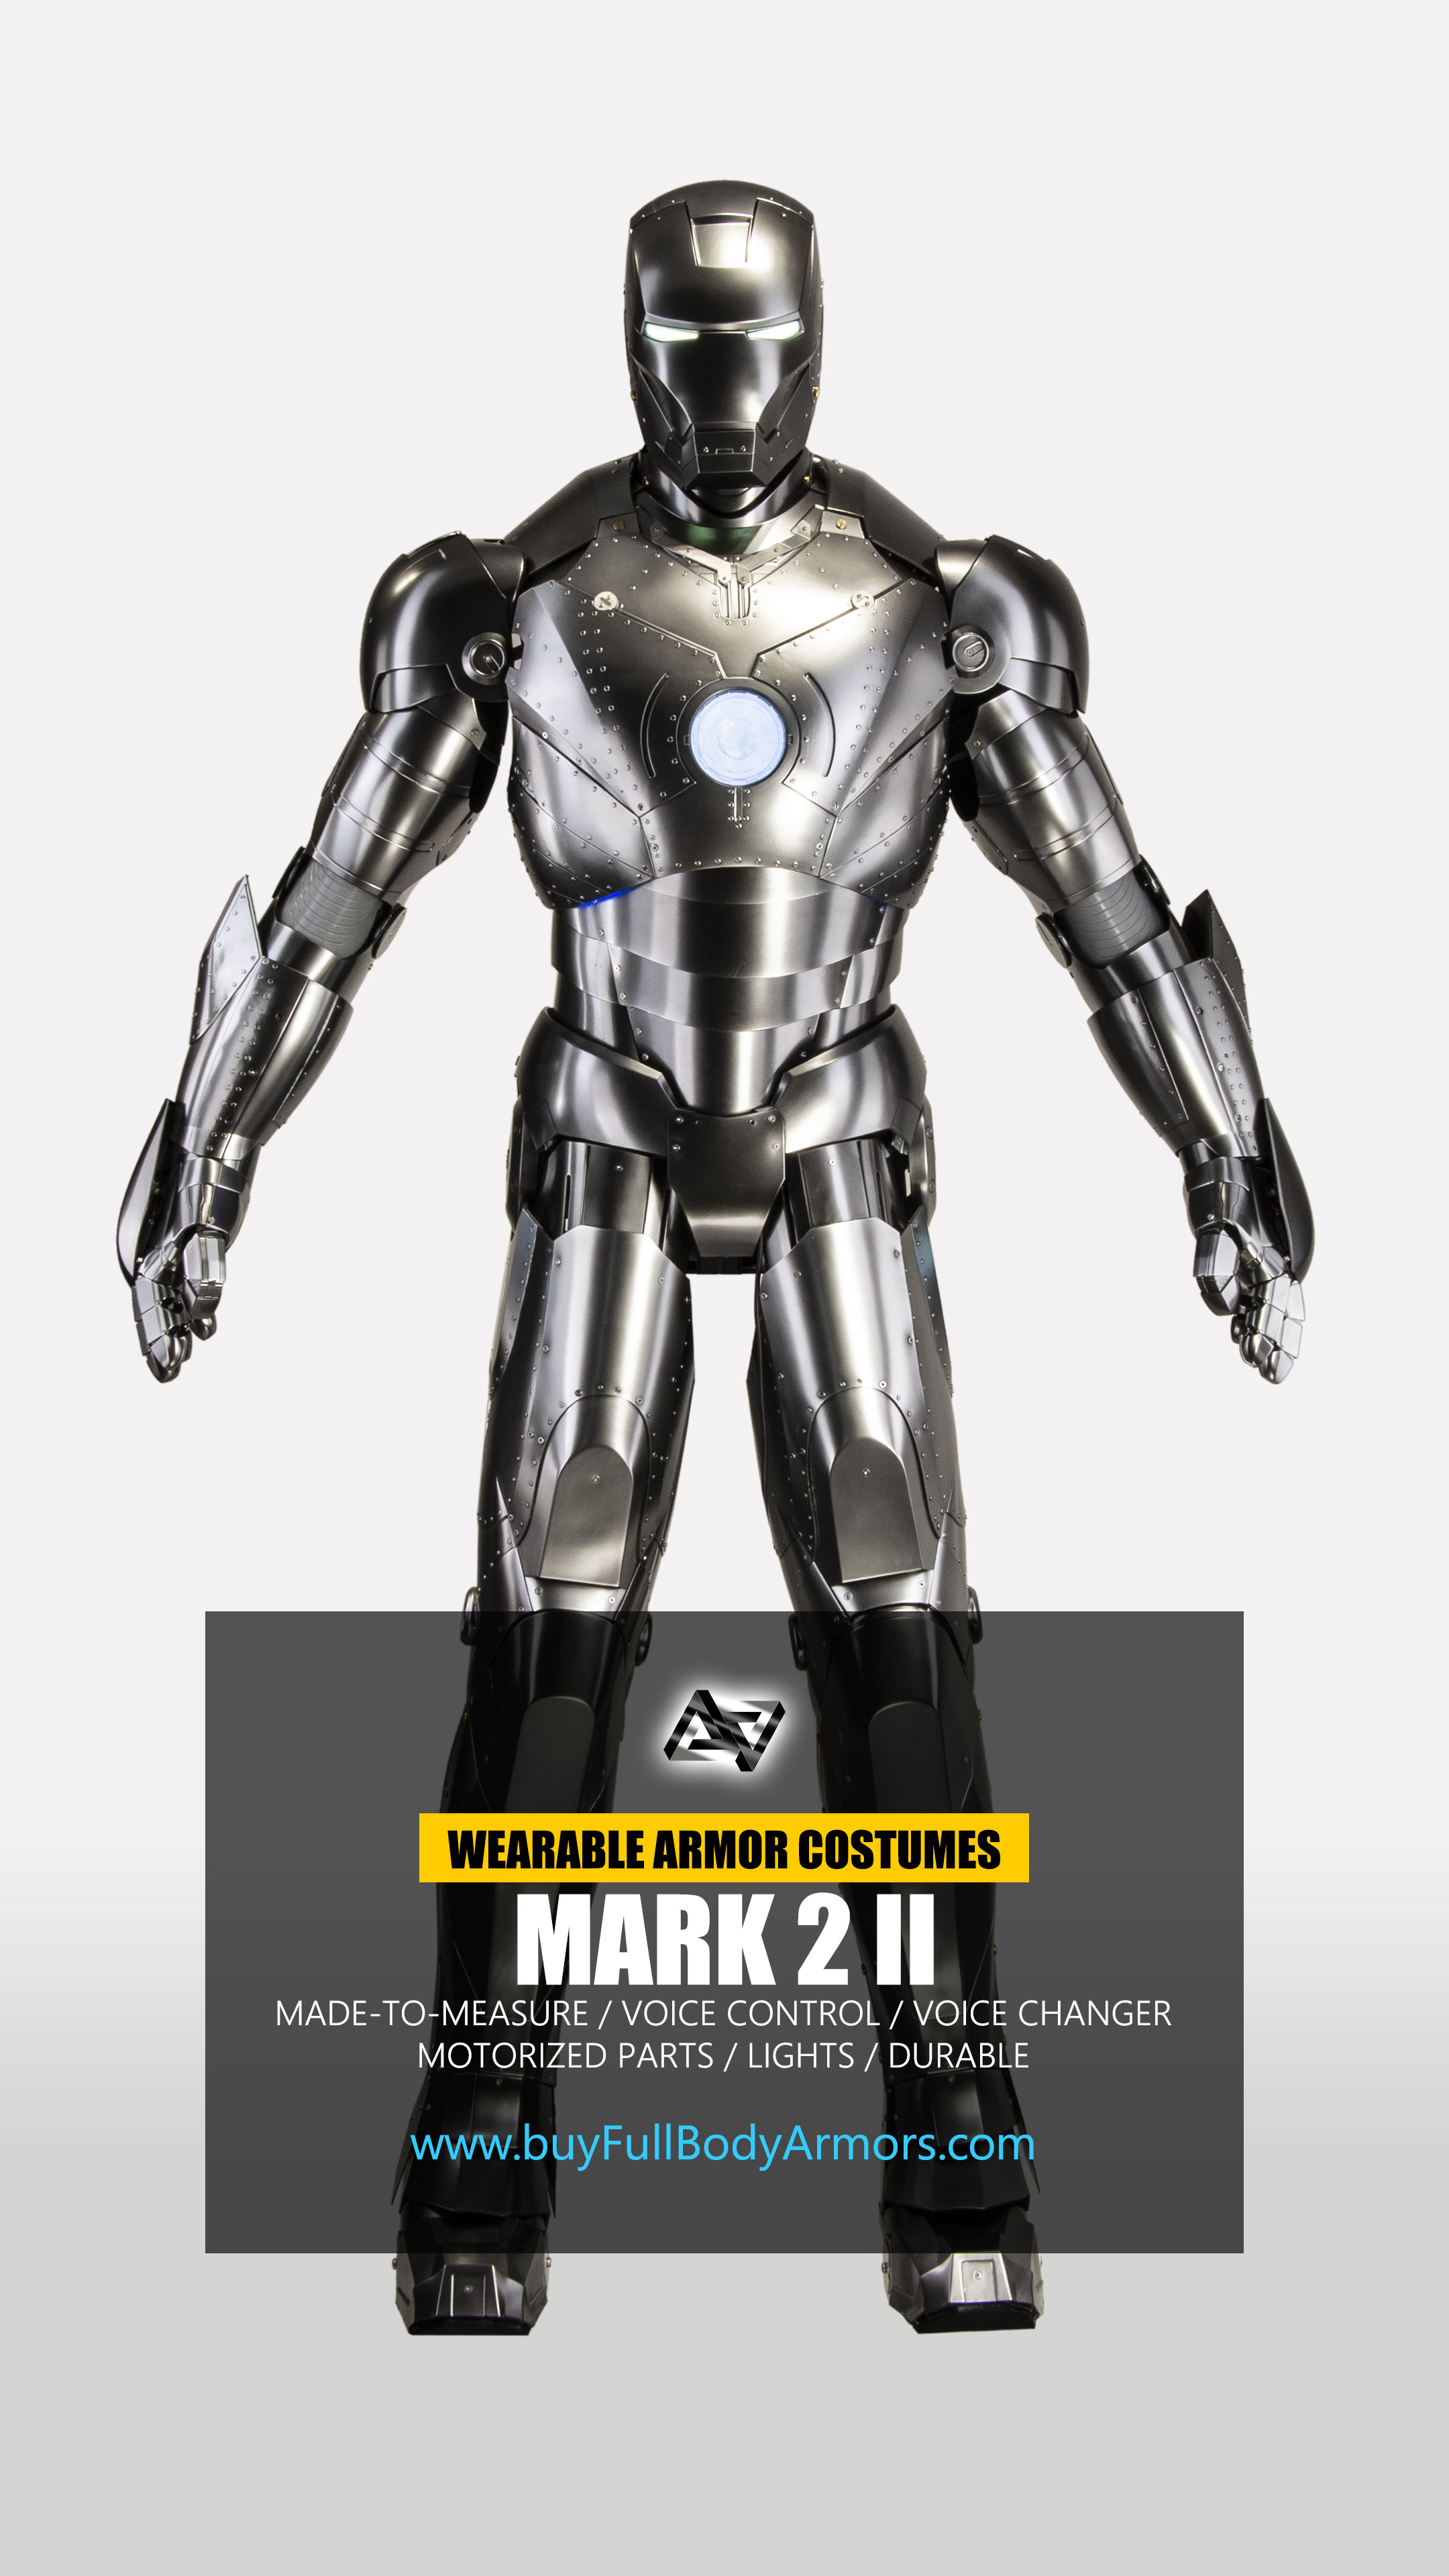 IRON MAN ARMOR COSTUME
MARK II 
The unique chrome silver painting and the exposed rivets design make
the Mark 2 suit the most shinny armor costume.